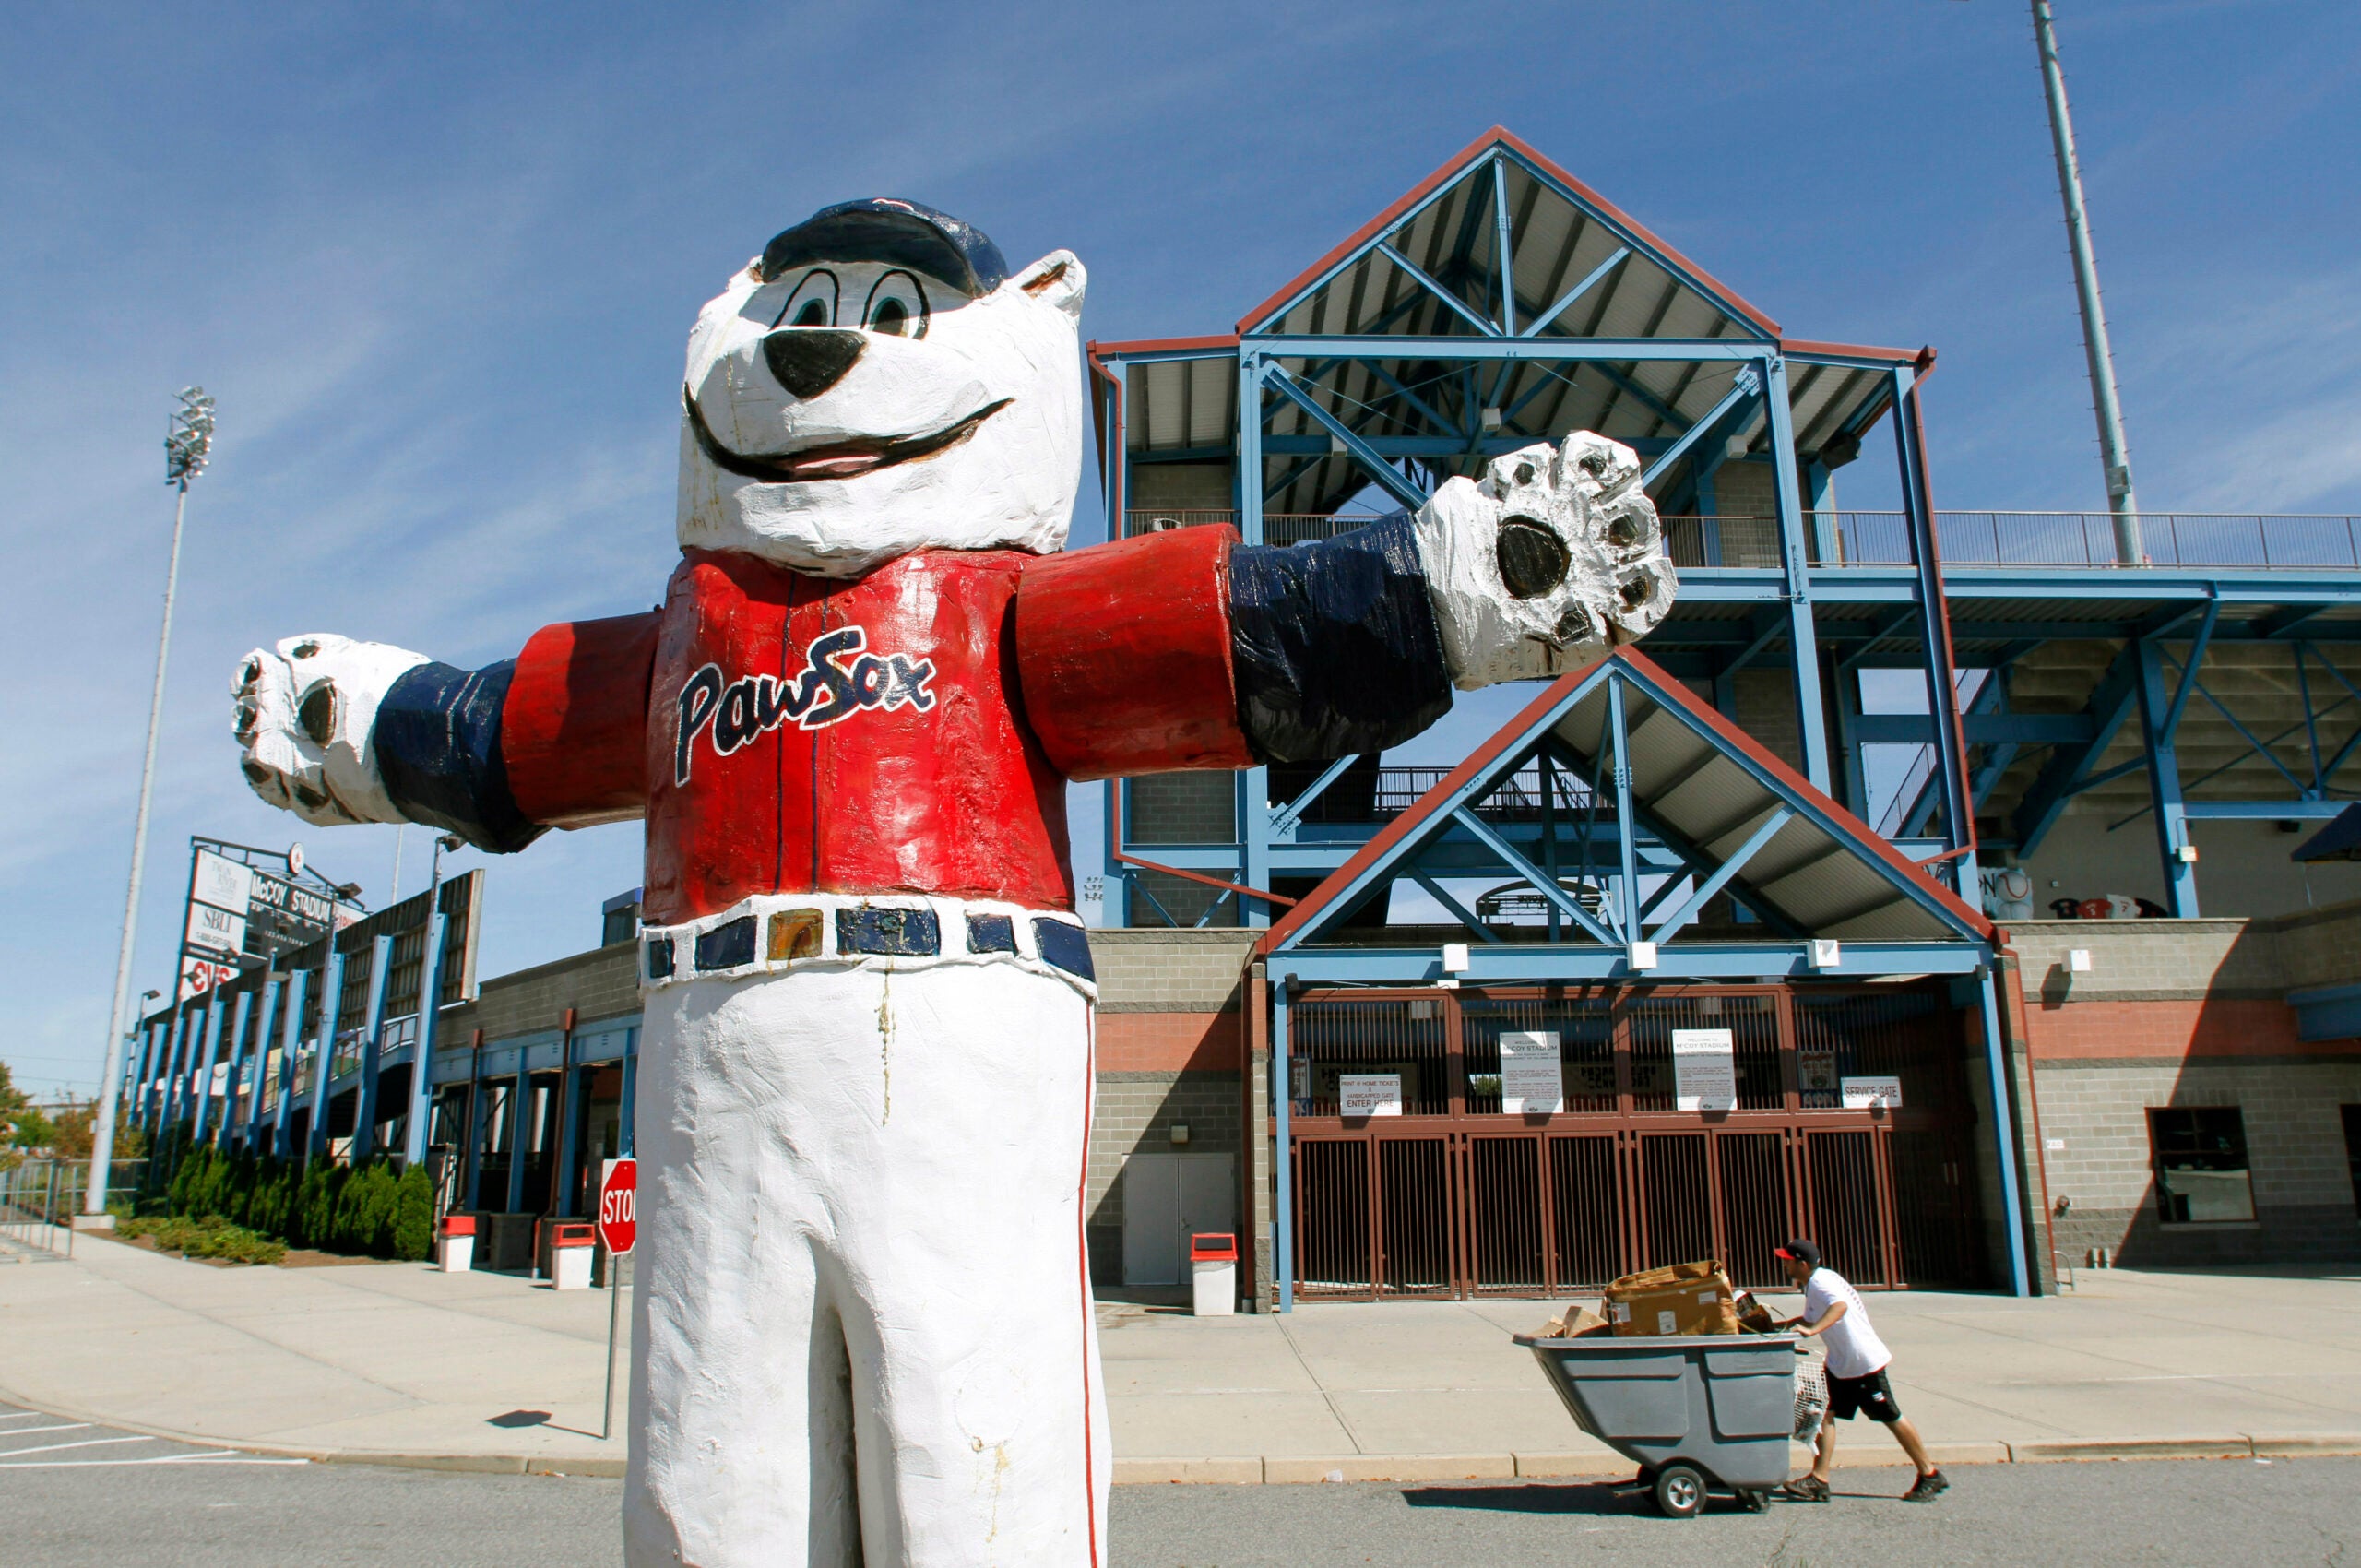 With PawSox leaving, what's next for Pawtucket? Rhode Island